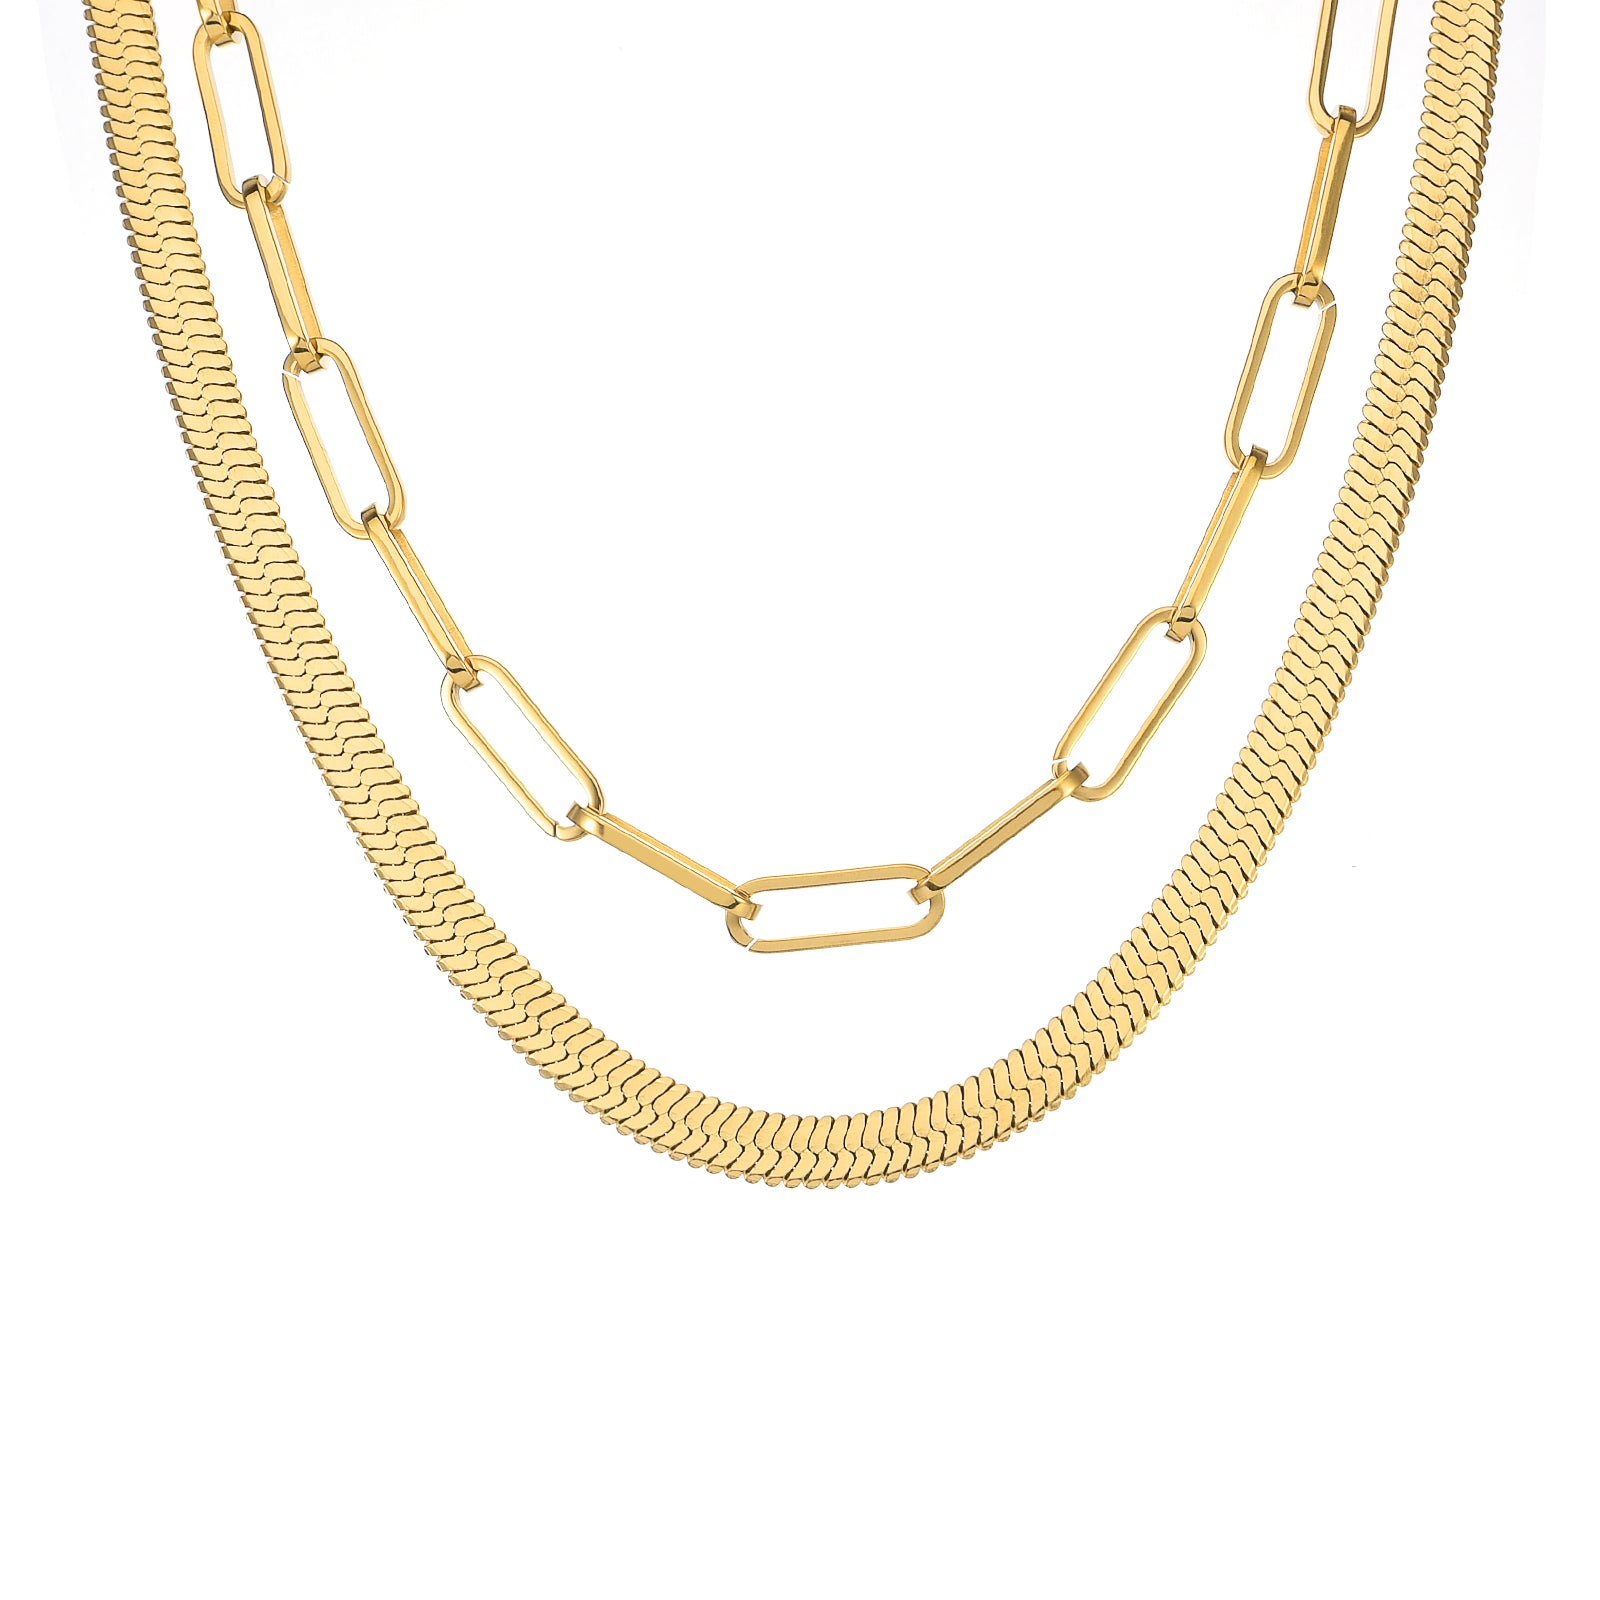 Wholesale 18k Yellow Gold Plated Herringbone Chain for your store - Faire